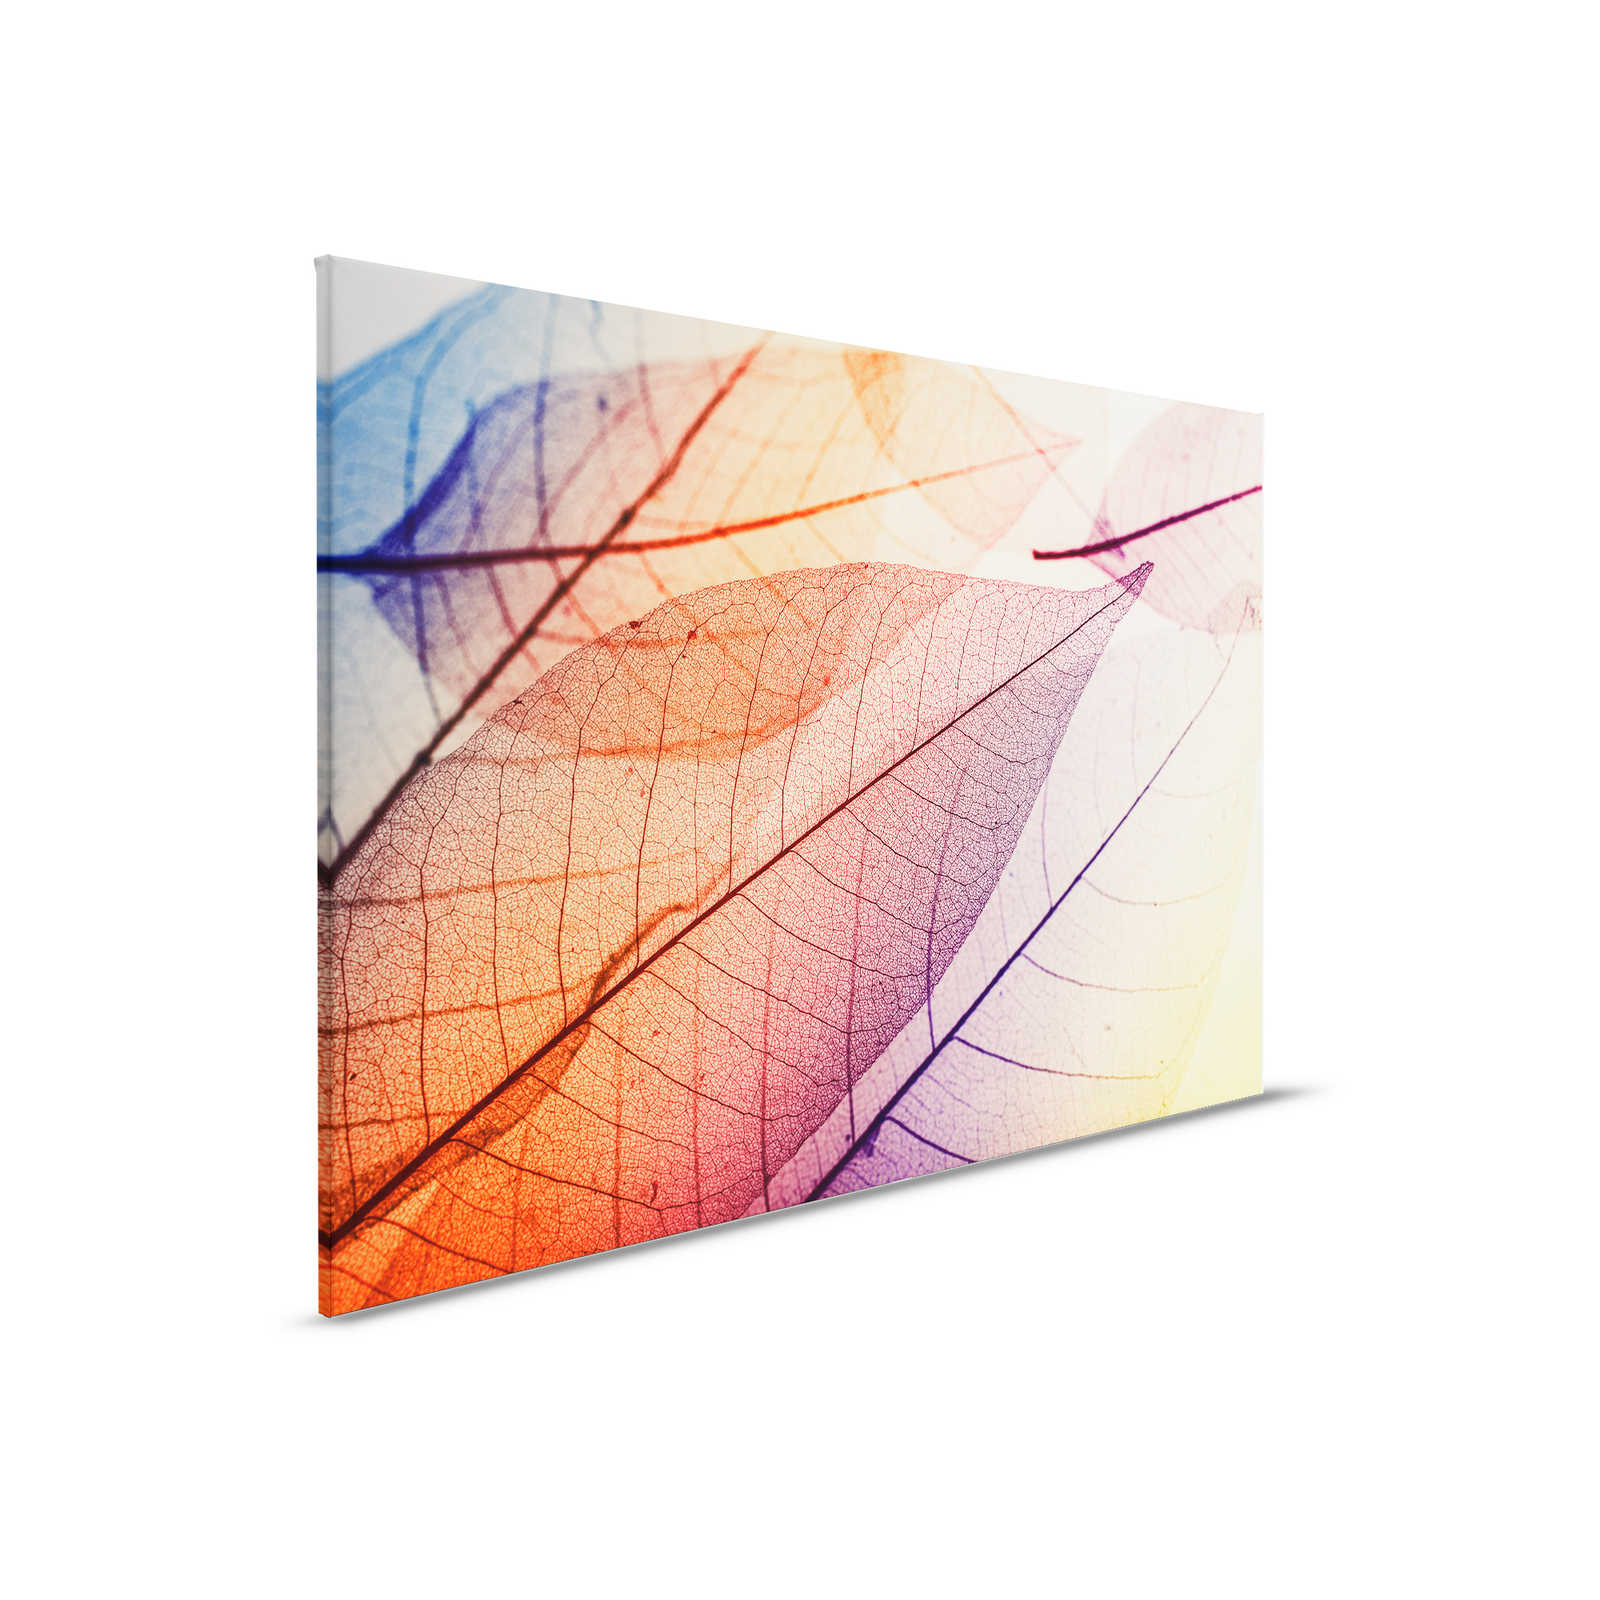         Canvas with leaf pattern X-ray - 0.90 m x 0.60 m
    